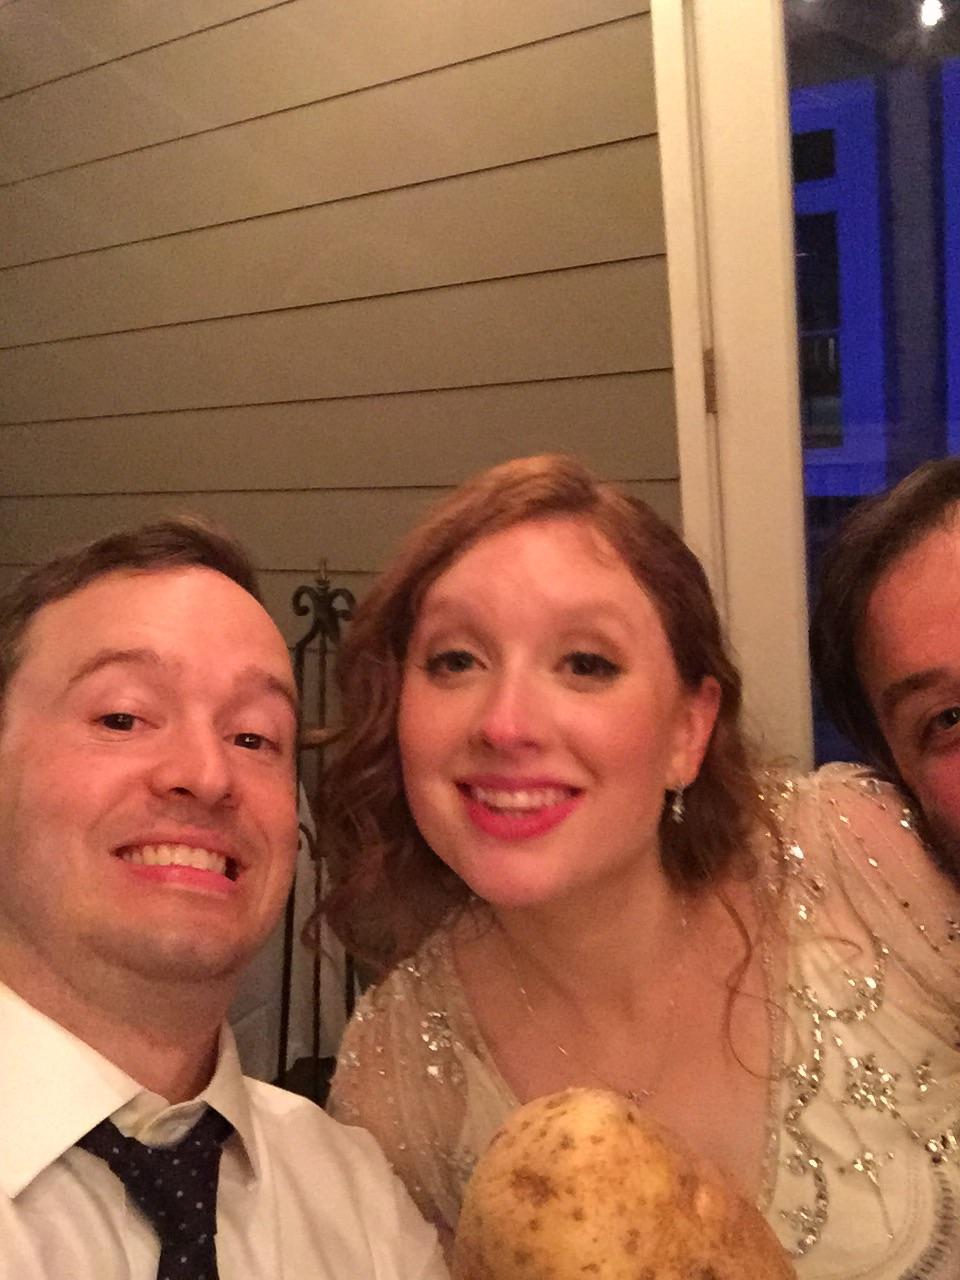  Just checking in with one of the groomsman and the bride. Don't worry, they were sober. 